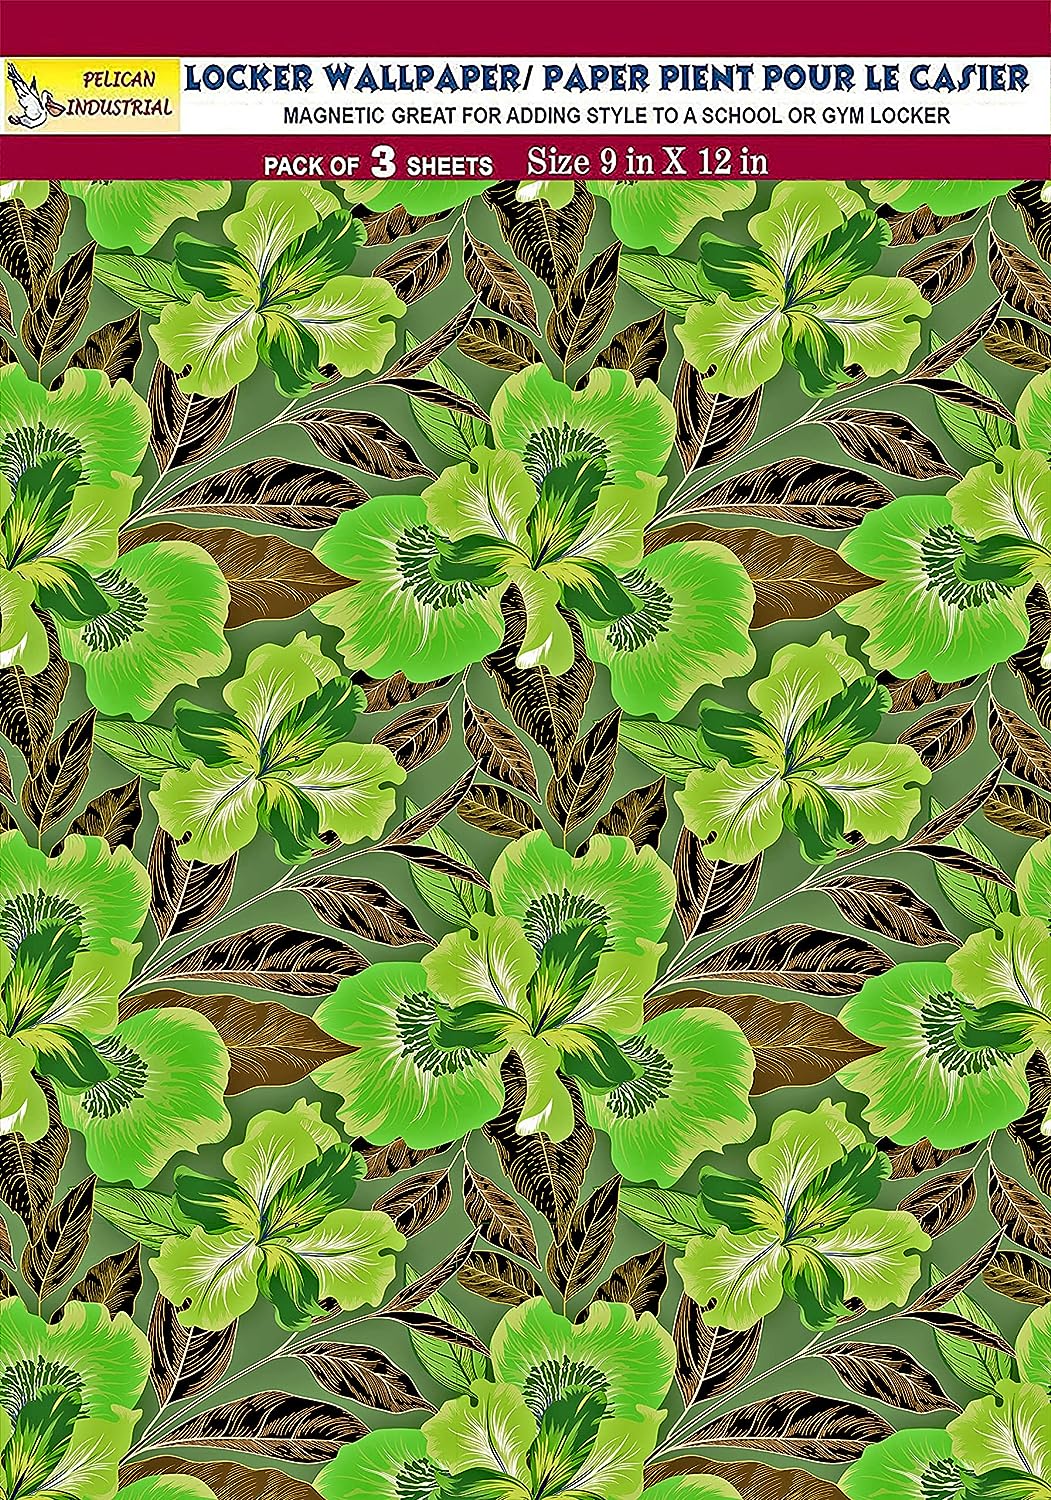 PELICAN INDUSTRIAL Magnetic Locker Wallpaper (Full Sheet Magnetic) - Remove & Reuse Decorative Vinyl - Made in USA - Fade, Tear and Water Resistant - (Tropical Leaves) - Pack of 3 Sheets (vb057b)